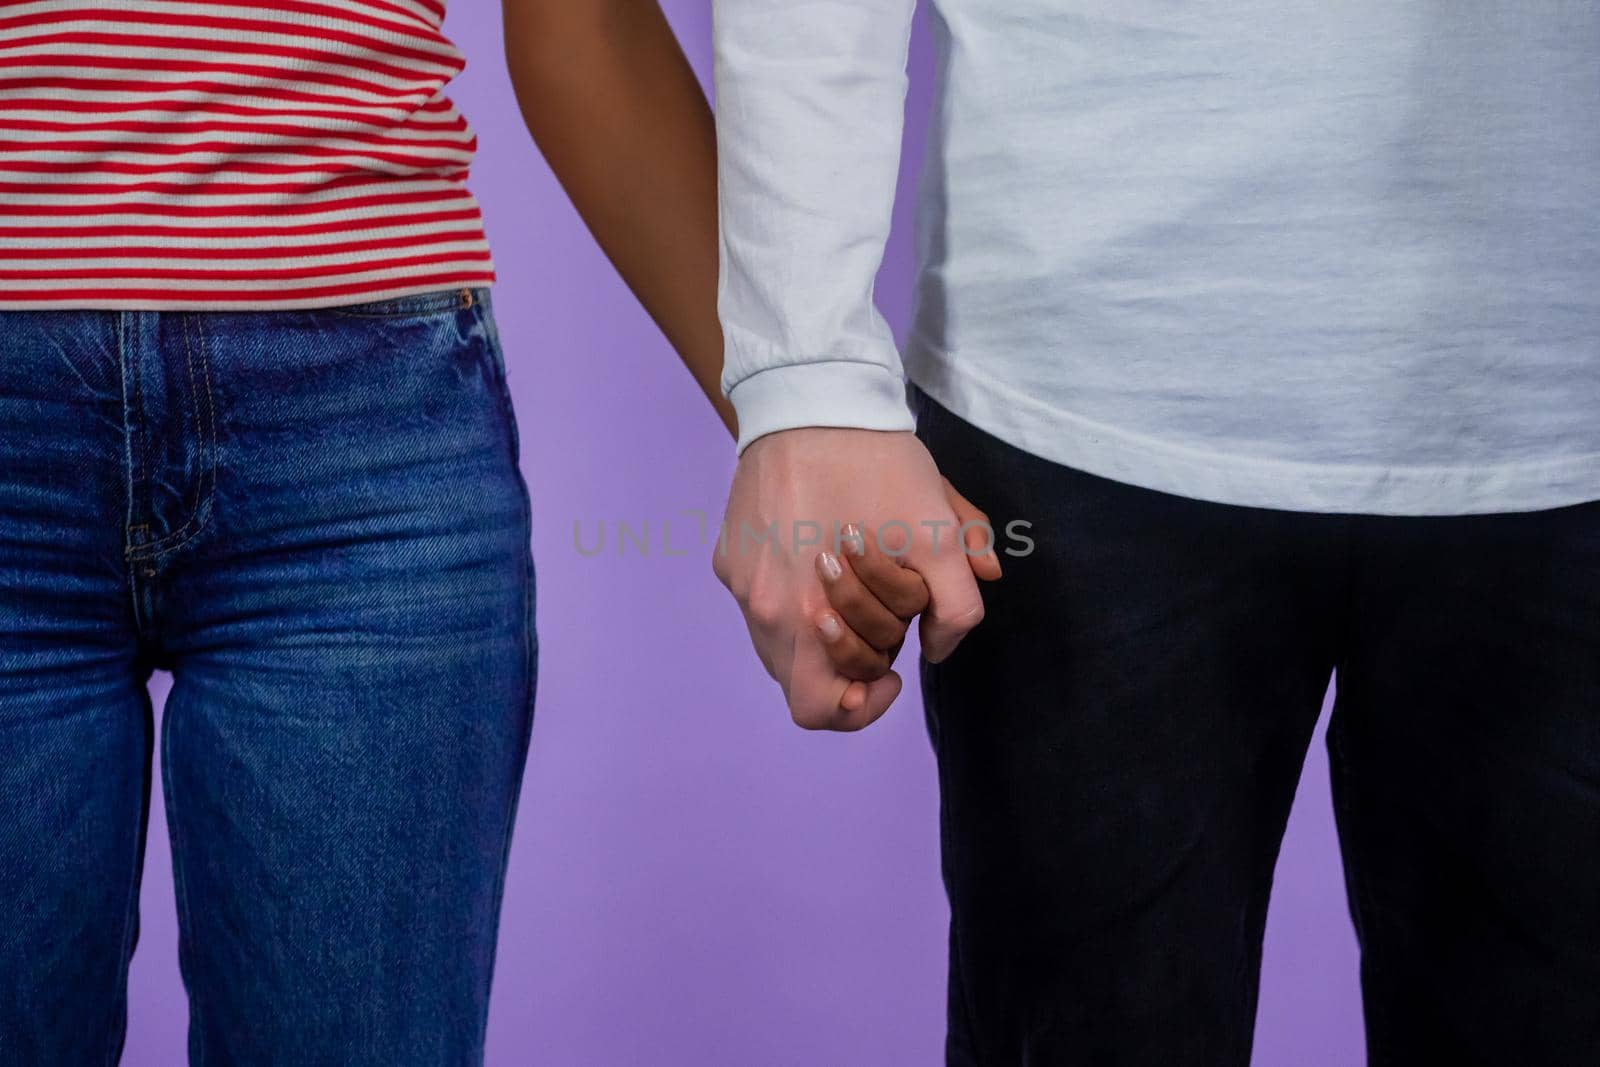 Hands of black woman and white man. Handshake close-up. Interracial friendship, anti-racism, fraternity, cooperation concept. Isolated on purple studio background. Ethnic diversity - Racial equality. by kristina_kokhanova